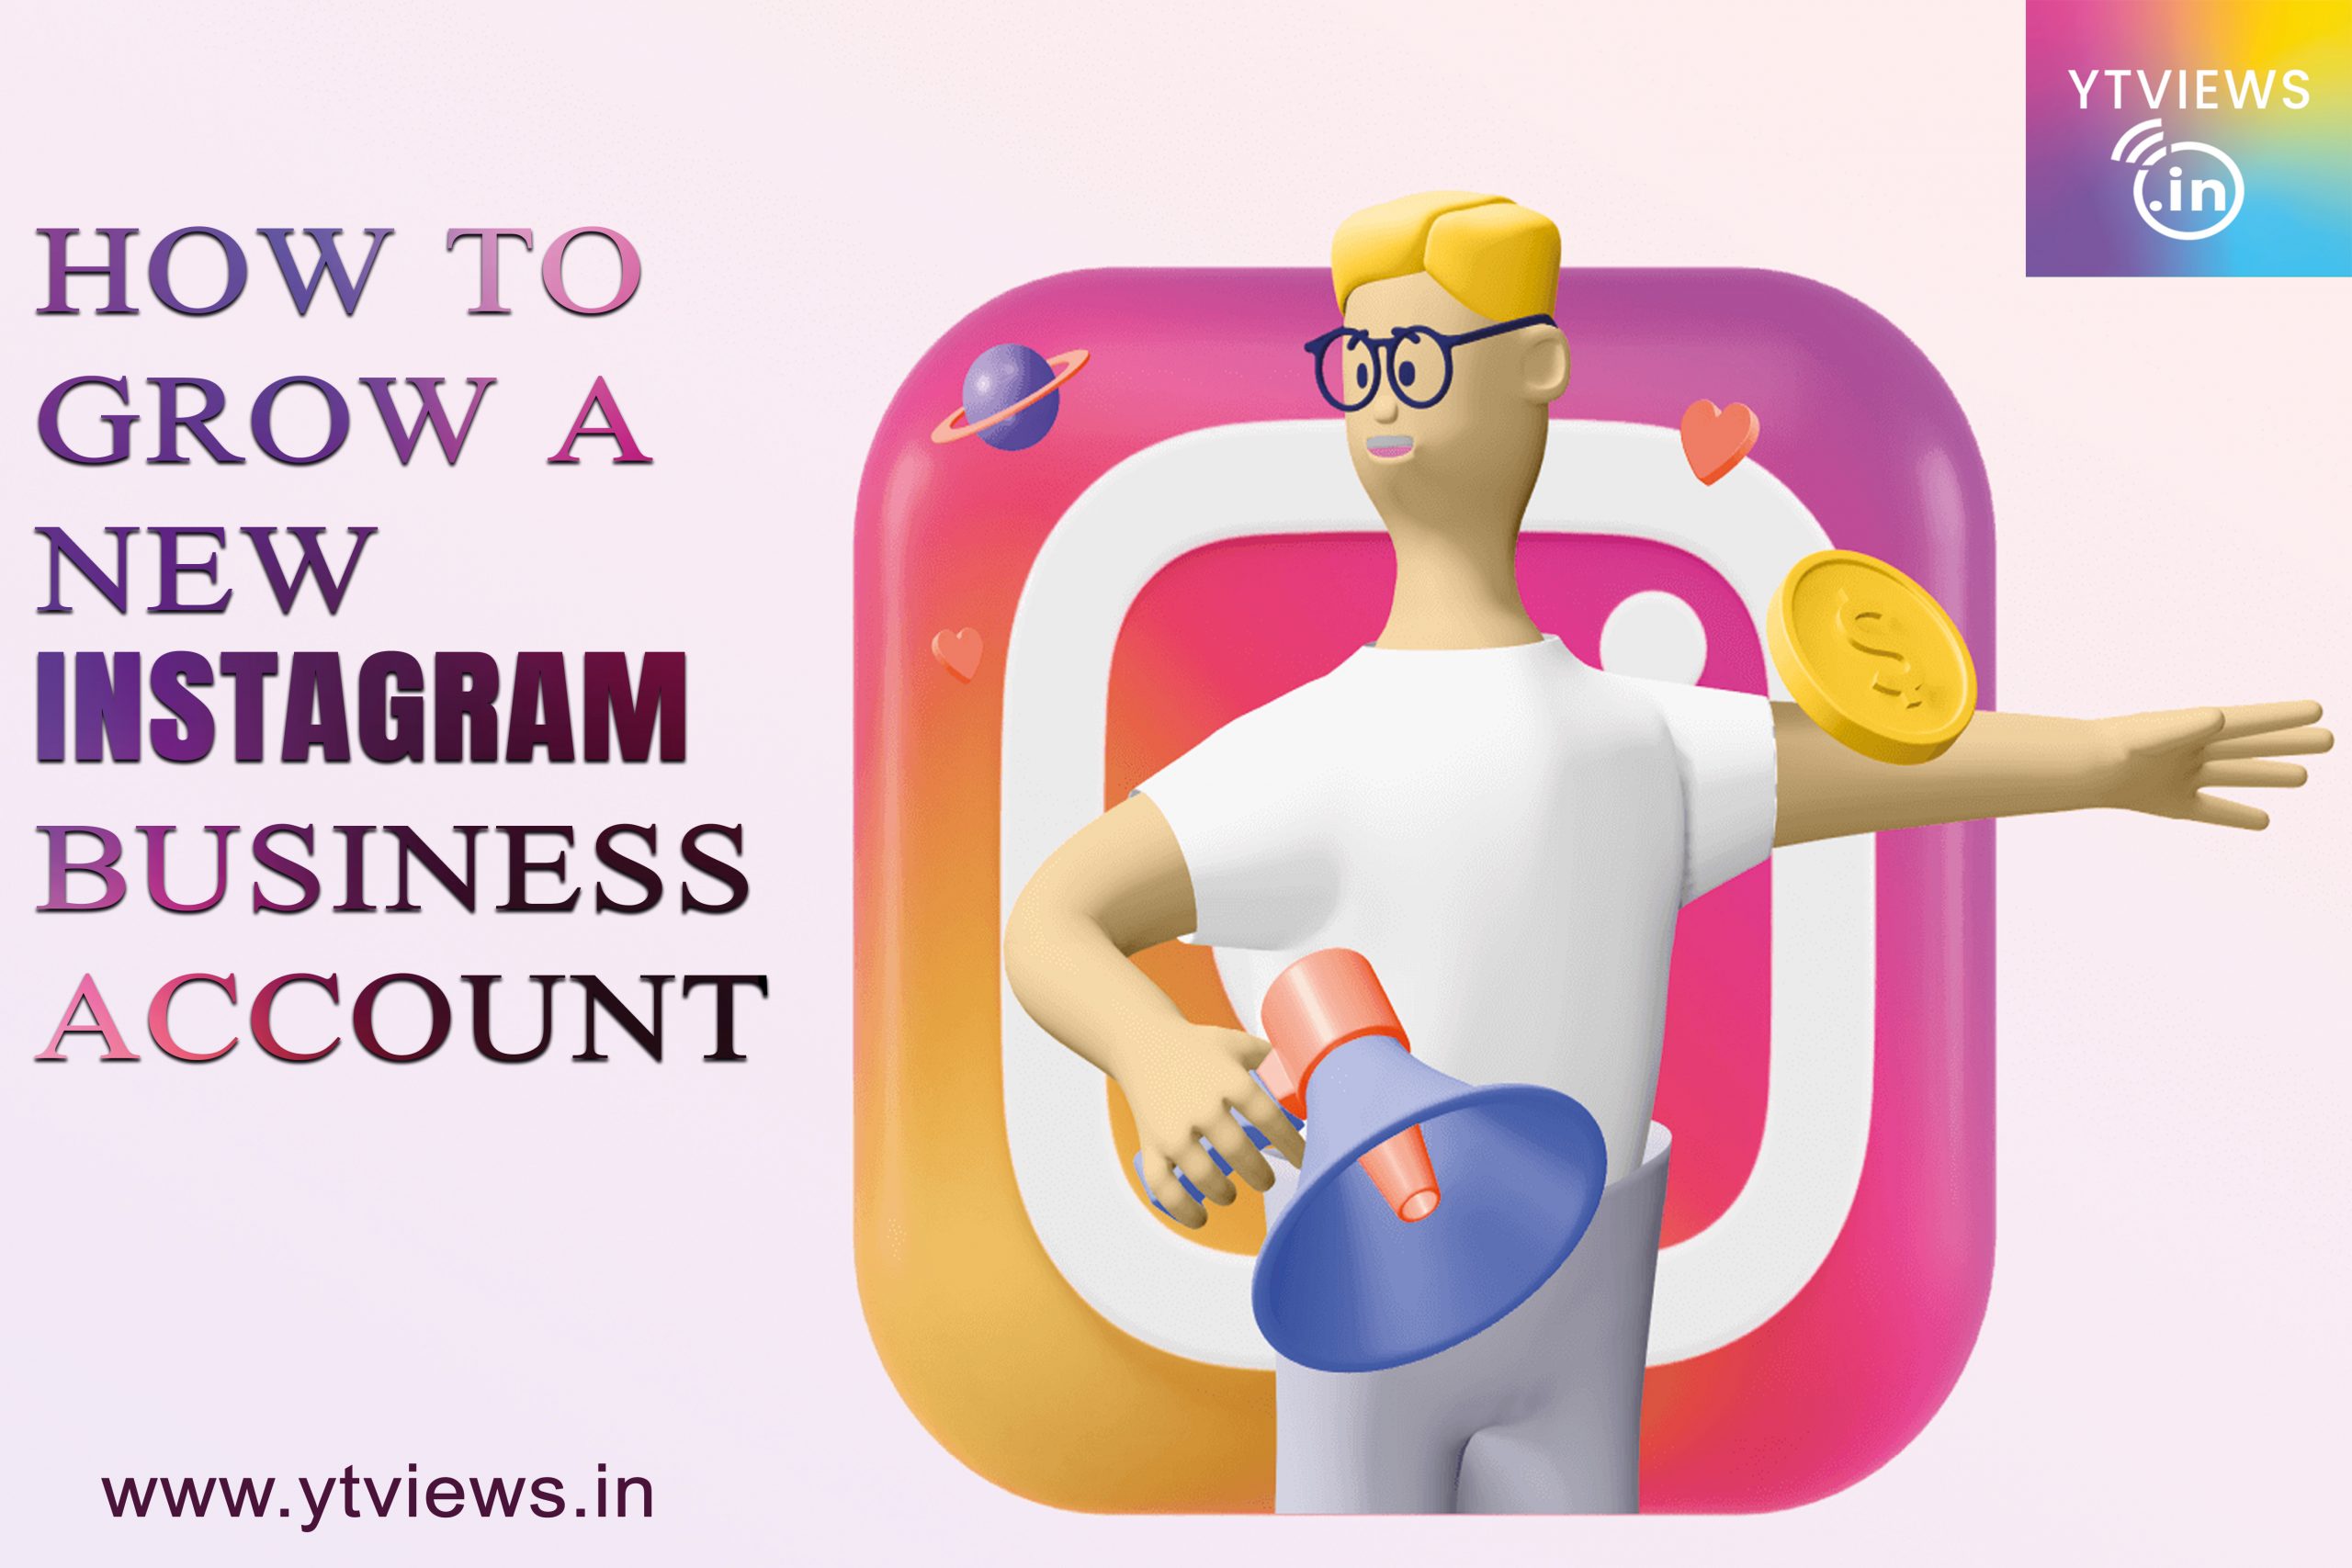 How to grow a new Instagram business account